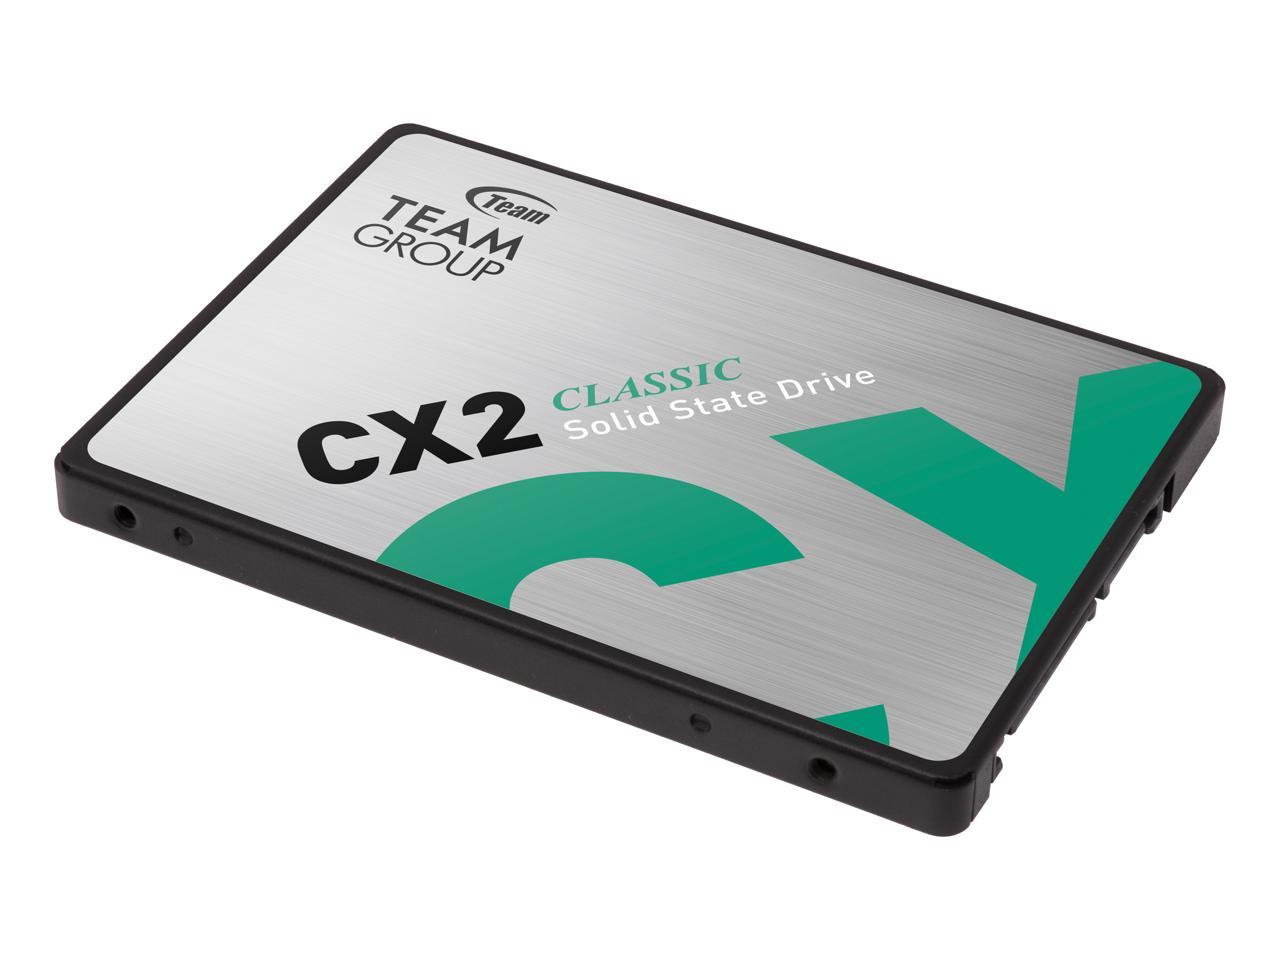 TEAMGROUP CX2 Solid State Drive, Form Factor 2.5 Inch, 2TB SATA III 3D TLC Internal SSD, Read Speed Up To 540 MBps  (T253X6002T0C101)